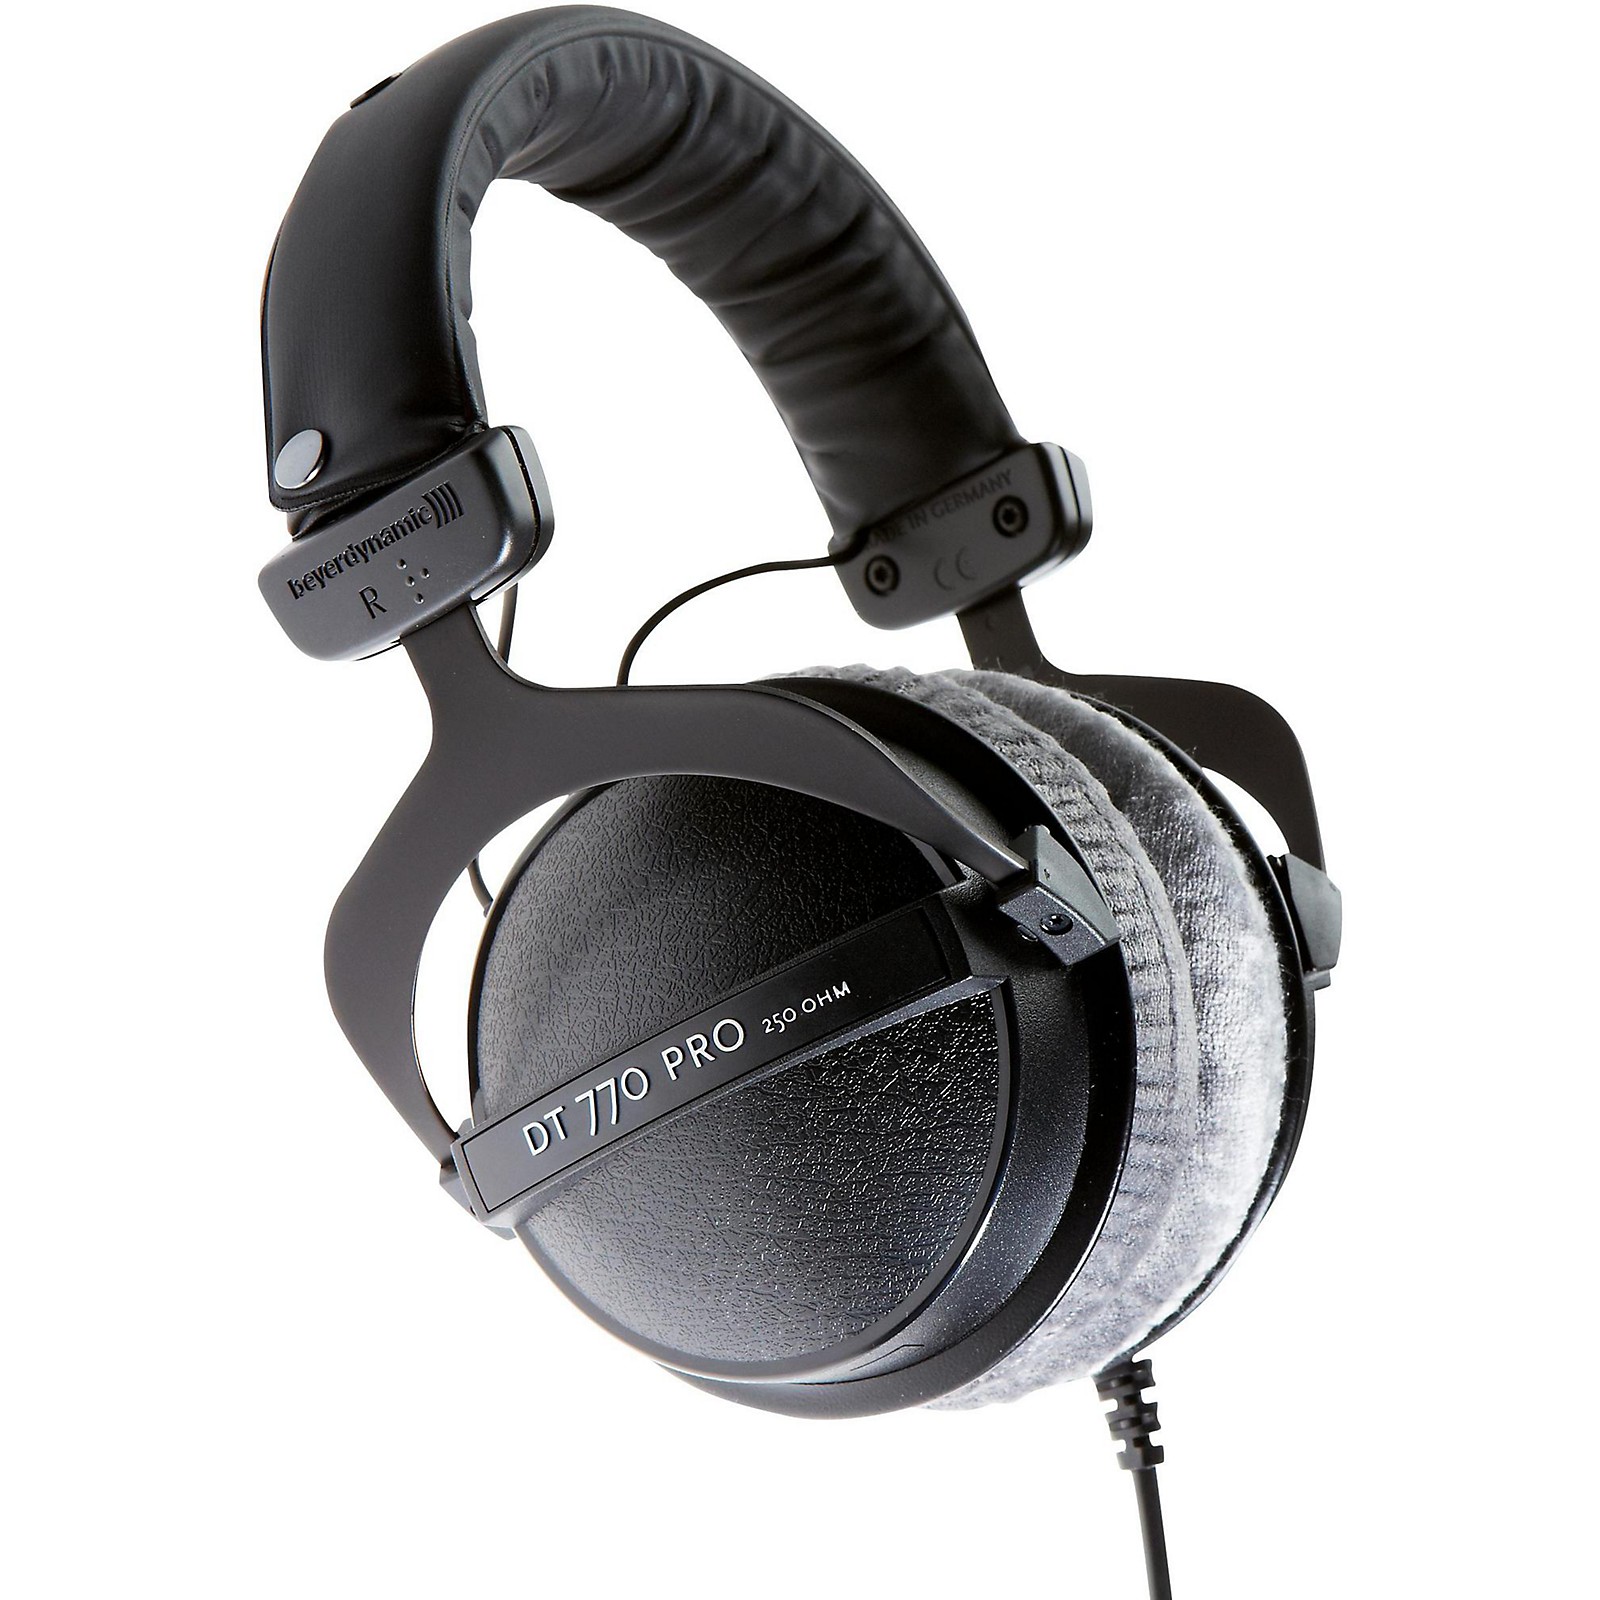 beyerdynamic DT 770 PRO 250 Ohm Over-Ear Studio Headphones in Black. Closed  Construction, Wired for Studio use, Ideal for Mixing in The Studio